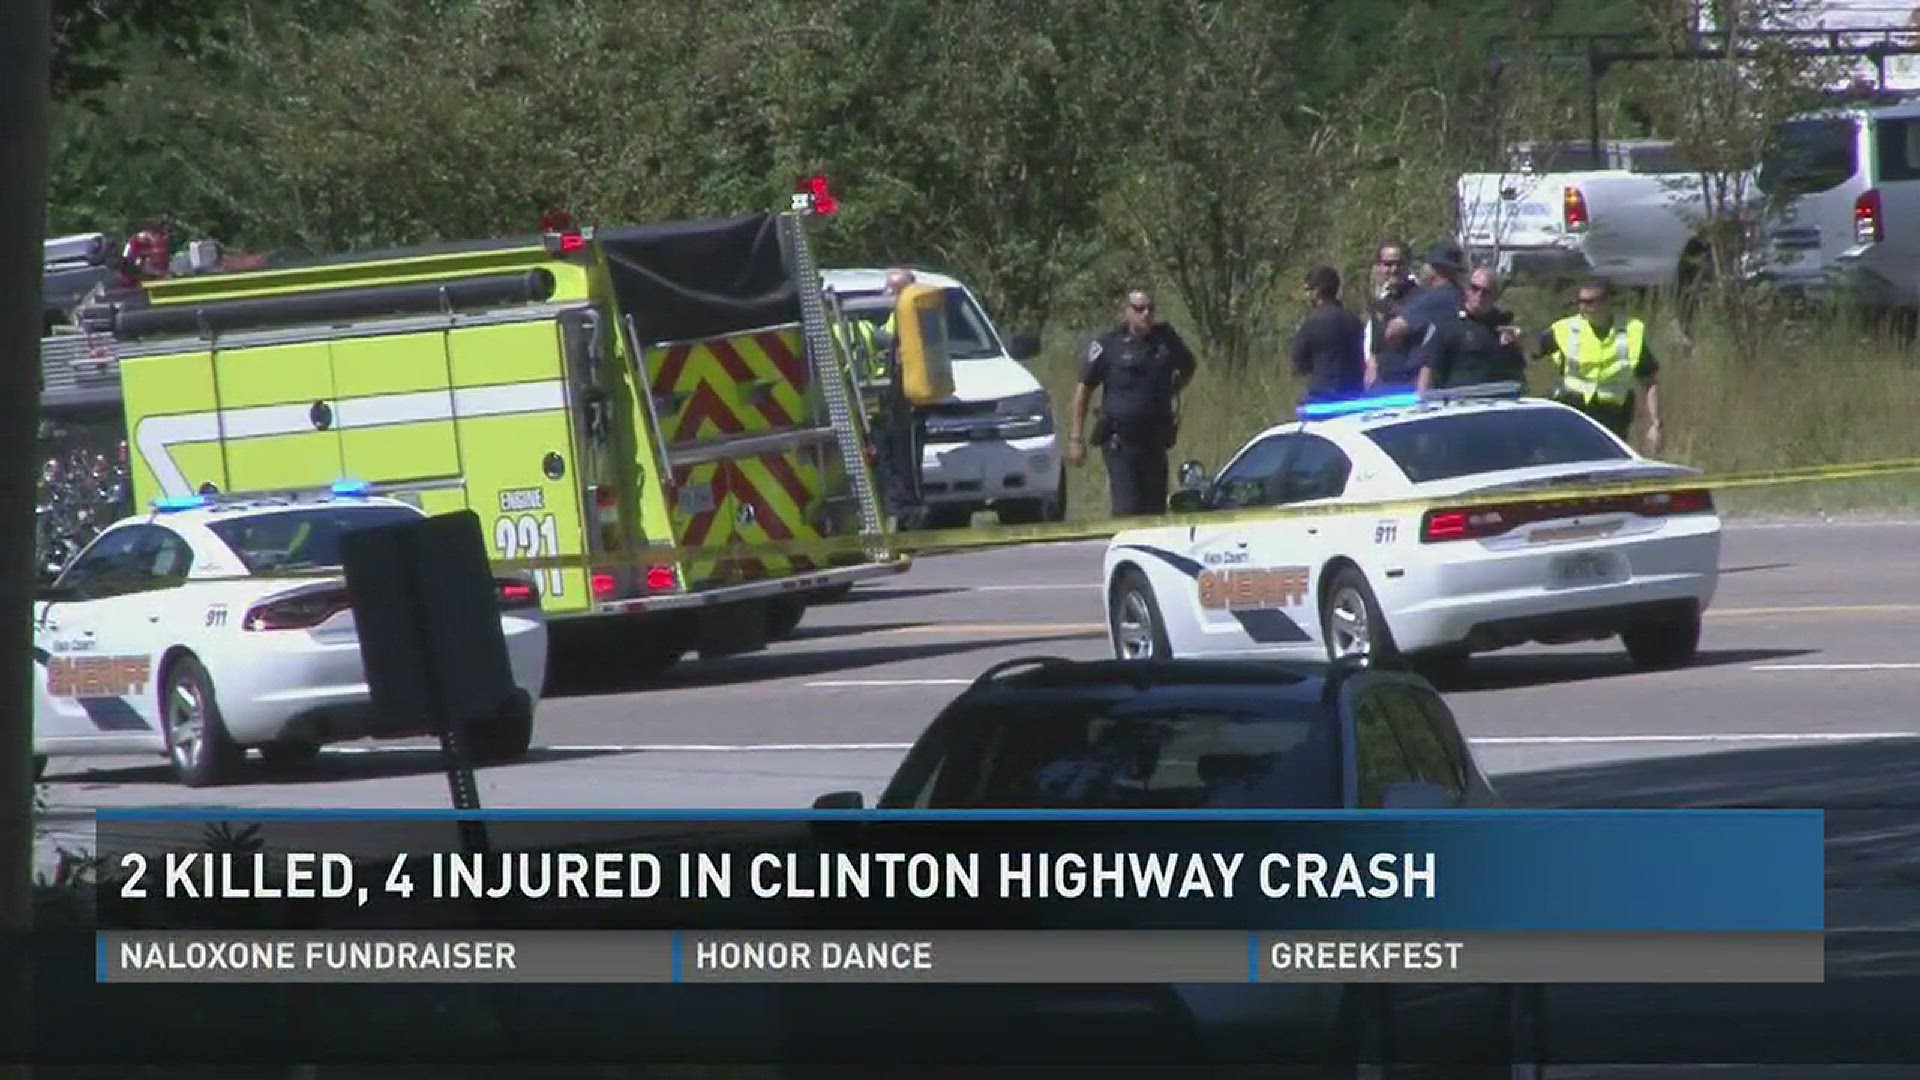 A crash on Clinton Highway left two dead and four others injured.